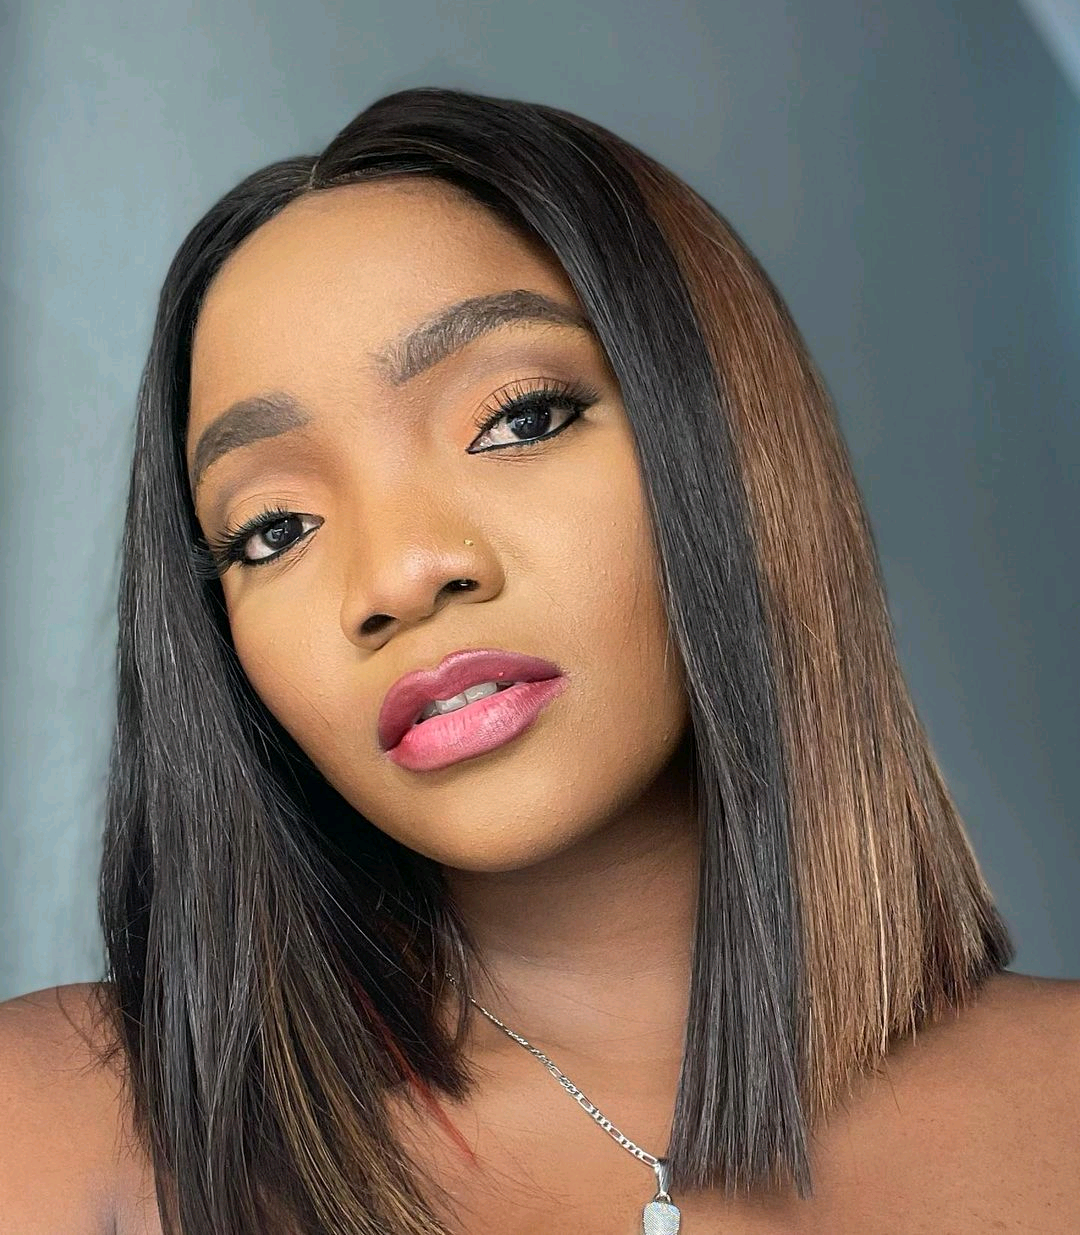 "I Recorded My Song, 'Woman' In 2019" - Singer Simi